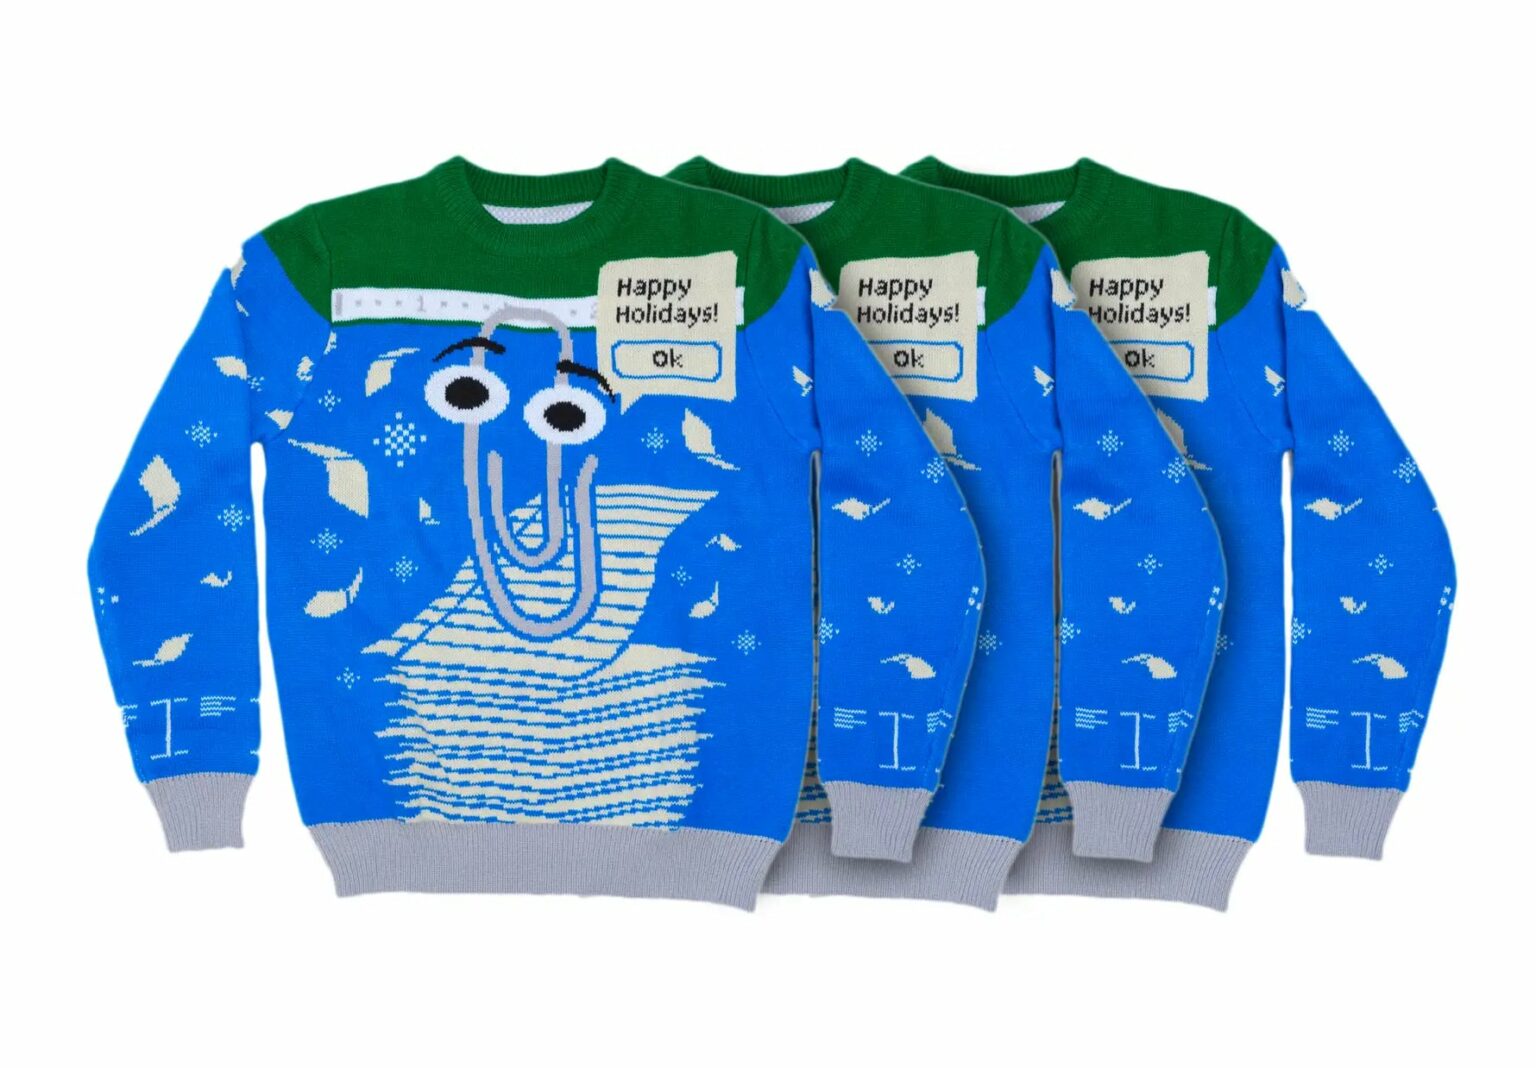 Microsoft's Ugly Christmas Sweater 2022 features Clippy